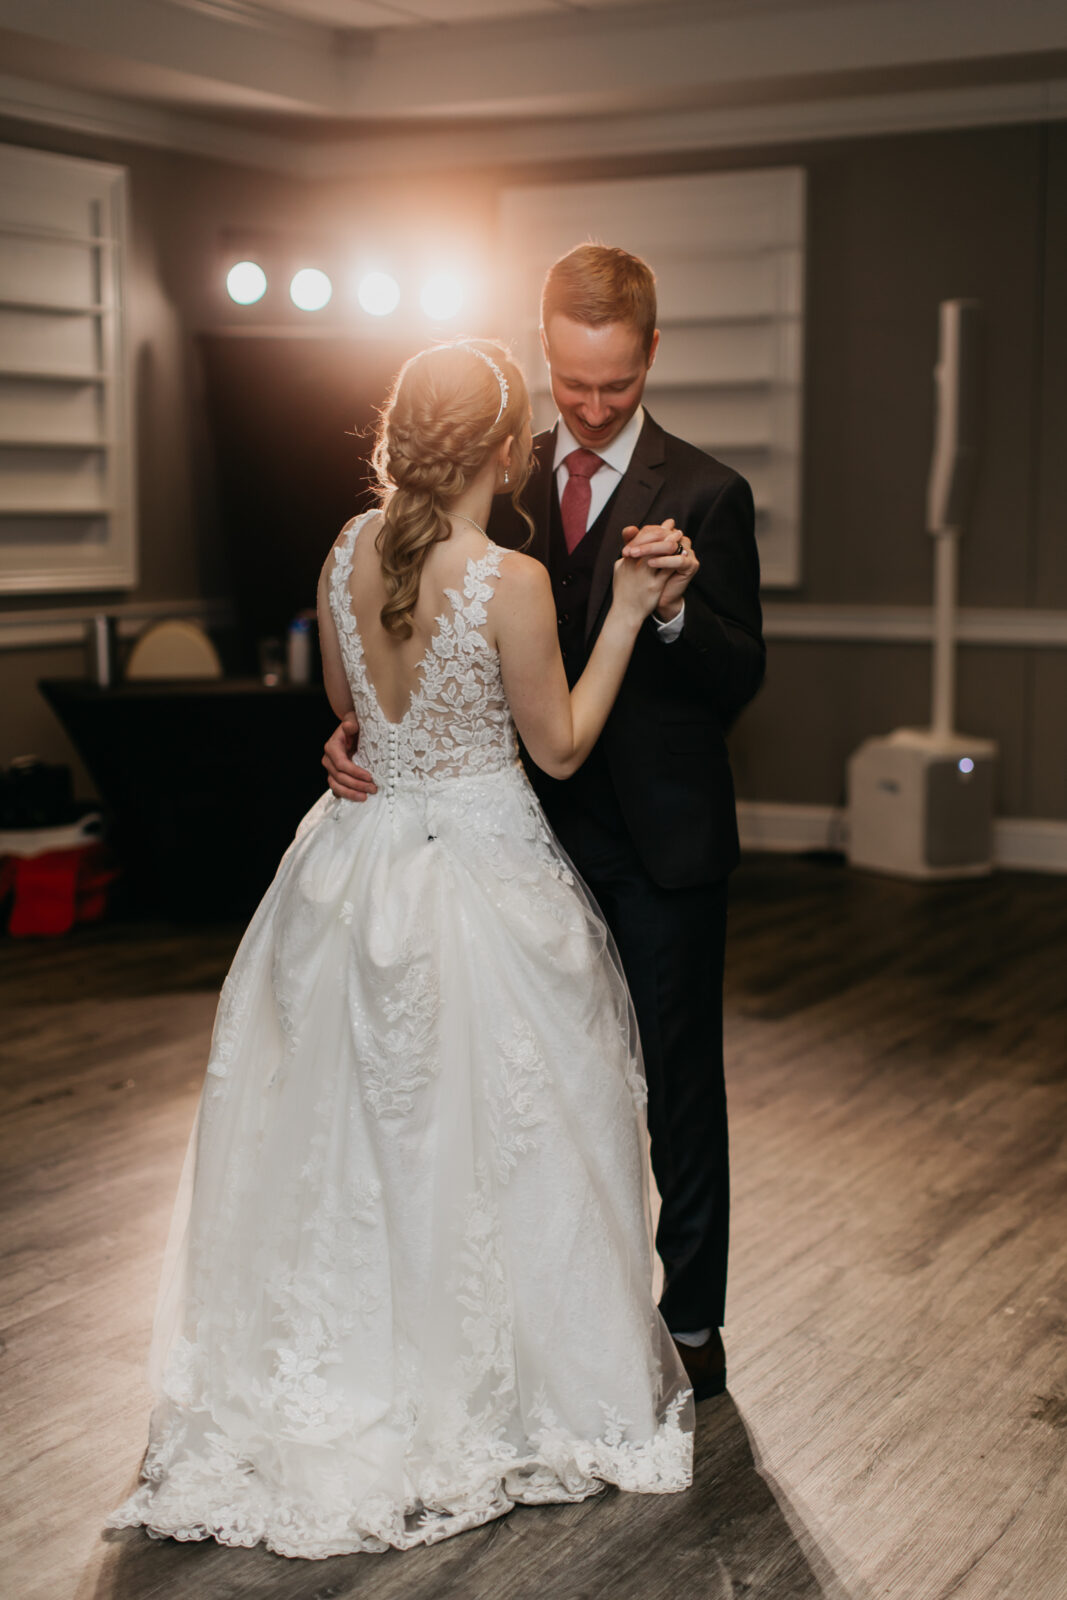 The bride and groom's first dance as a married couple